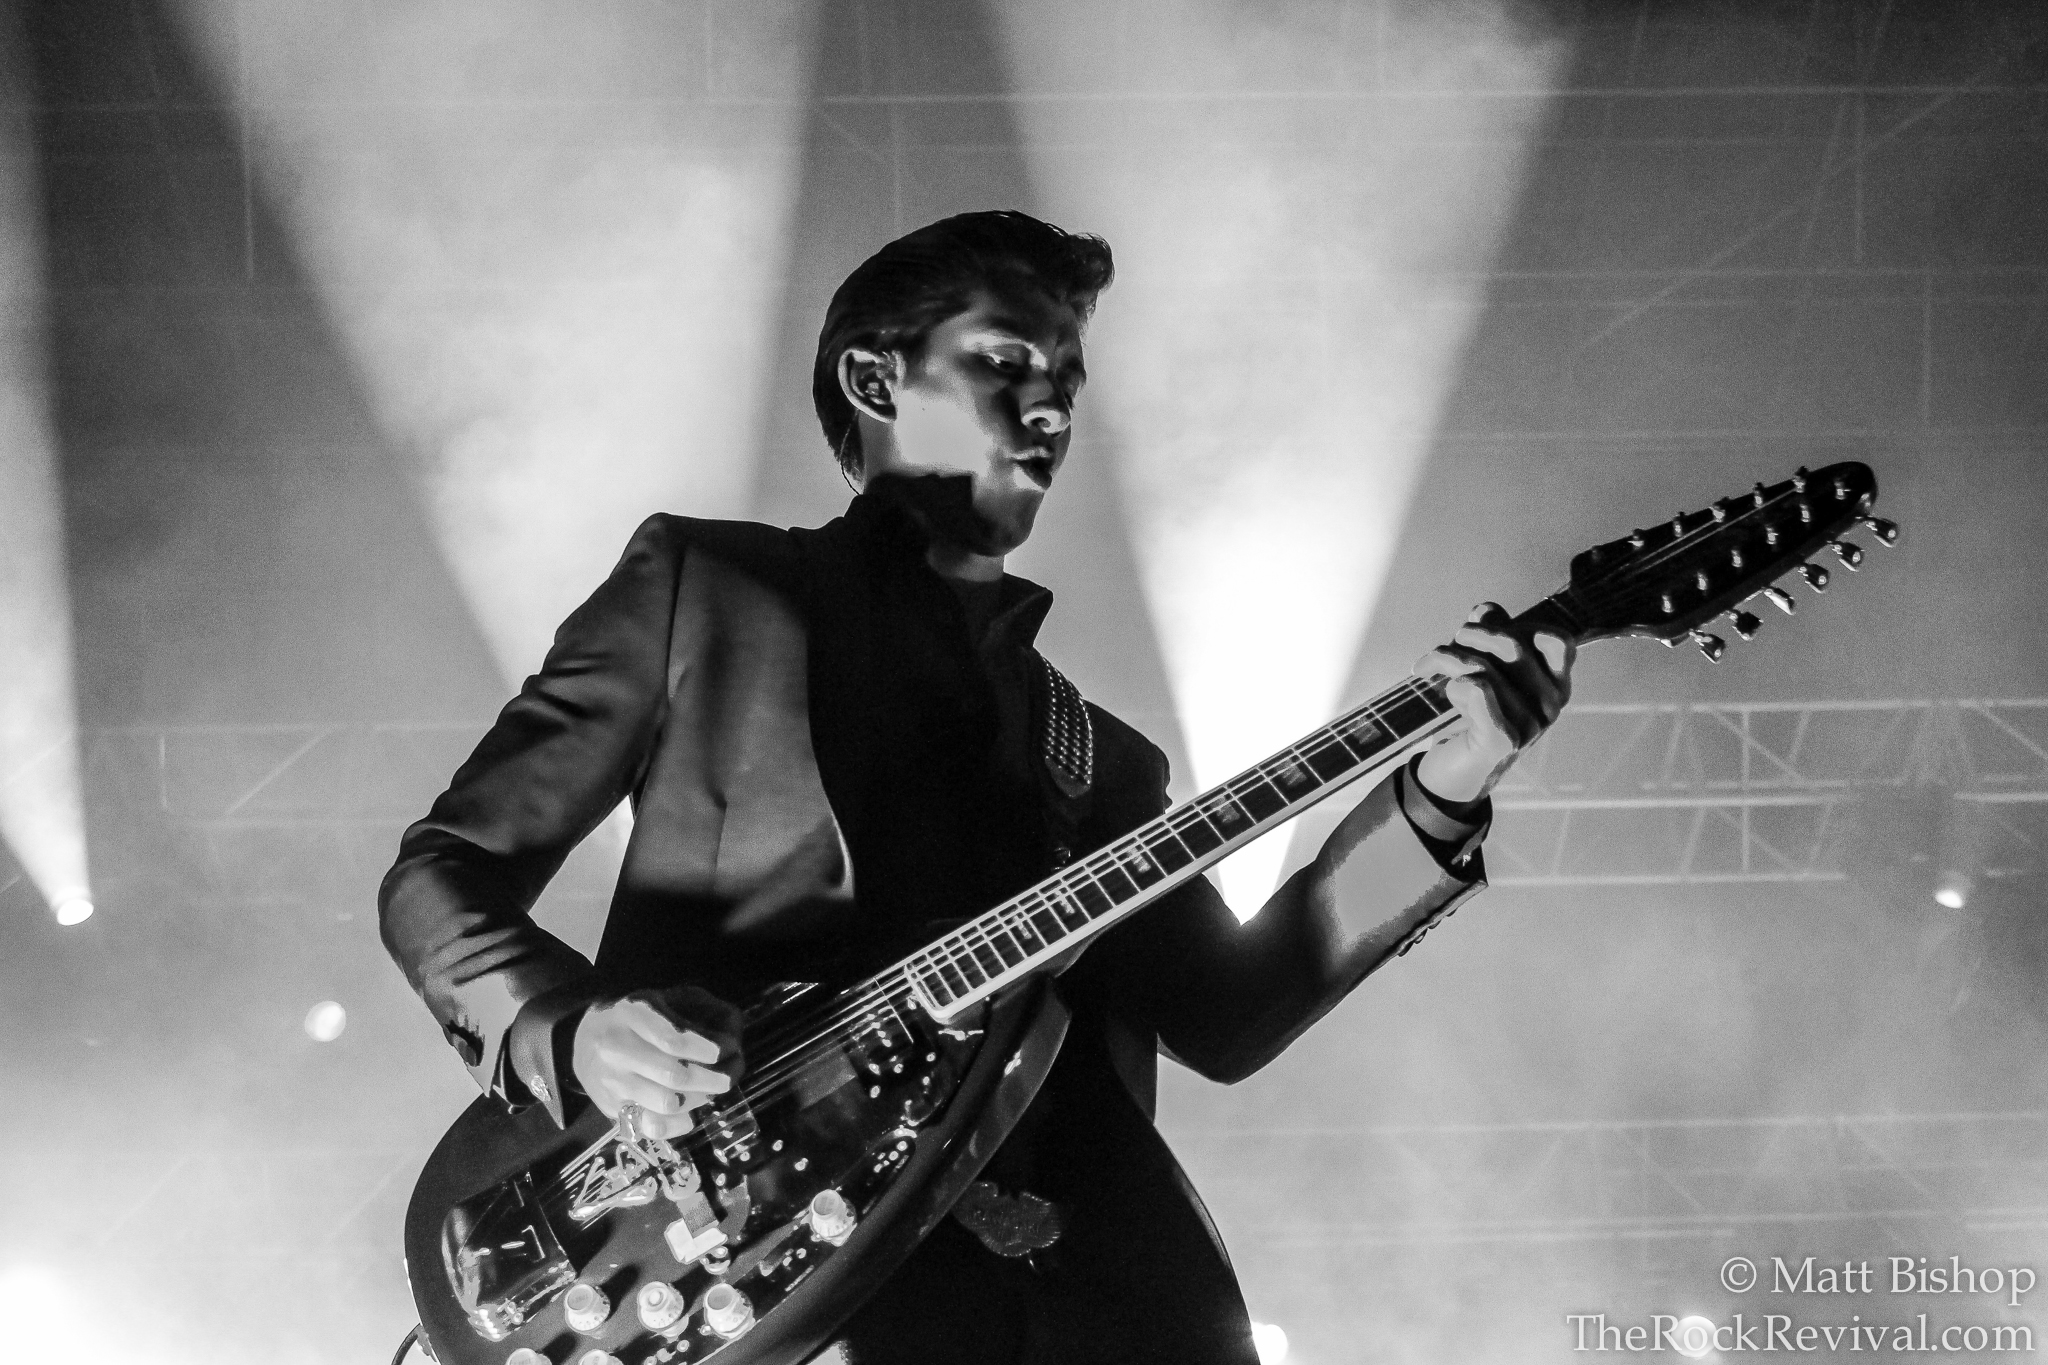 ARCTIC MONKEYS PREMIERE NEW MUSIC VIDEO FOR “SNAP OUT OF IT”